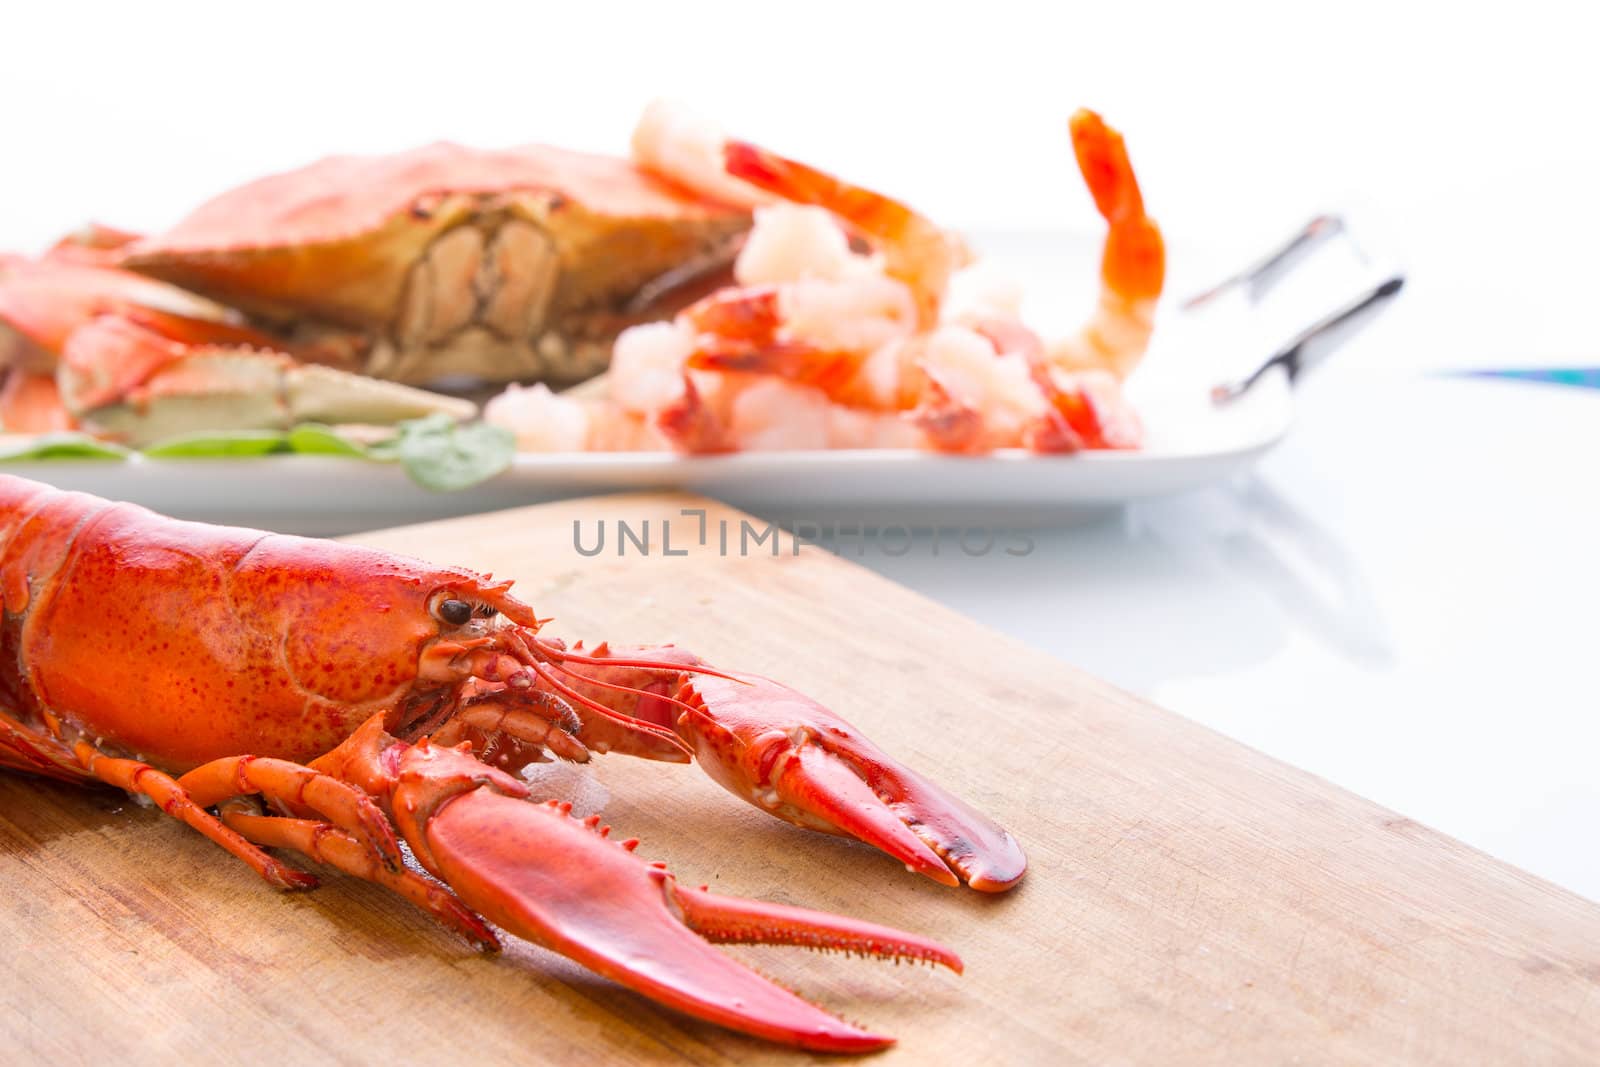 Preparing dungeness crab, red lobster and shrimps in the kitchen on the cutting board